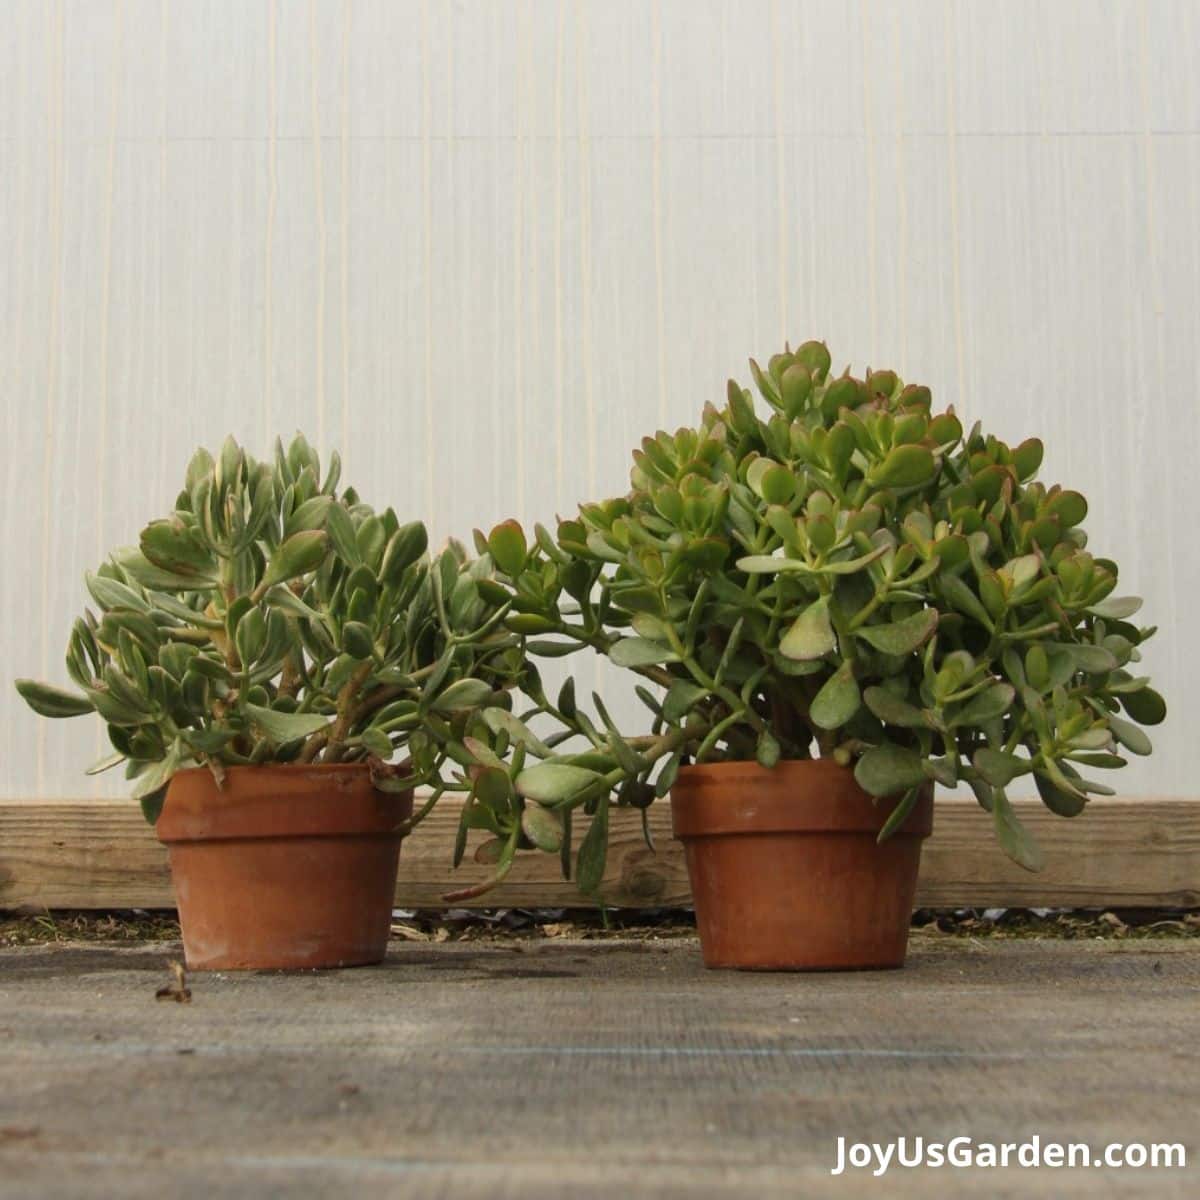 two jade plants in clay pots on the ground next to each other in greenhouse